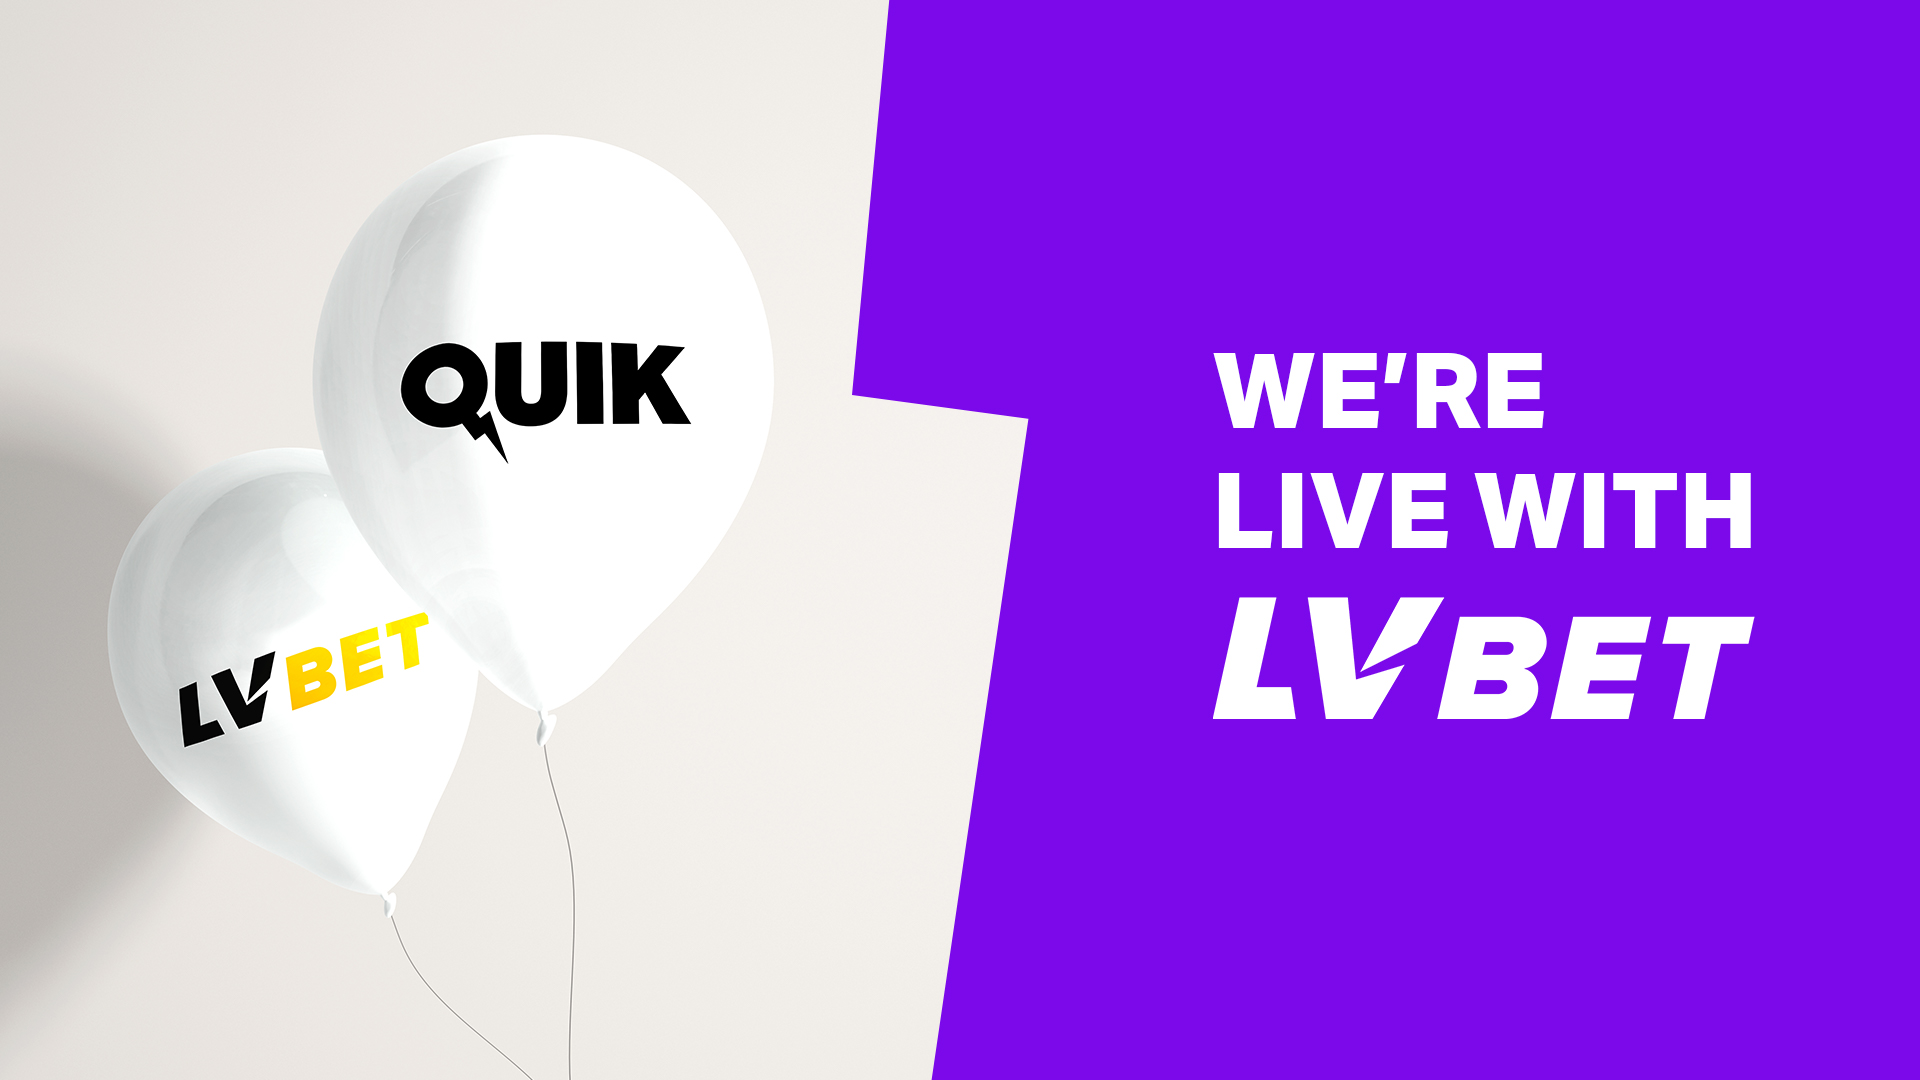 LV BET players can now play QUIK’s portfolio of Unique Live Games